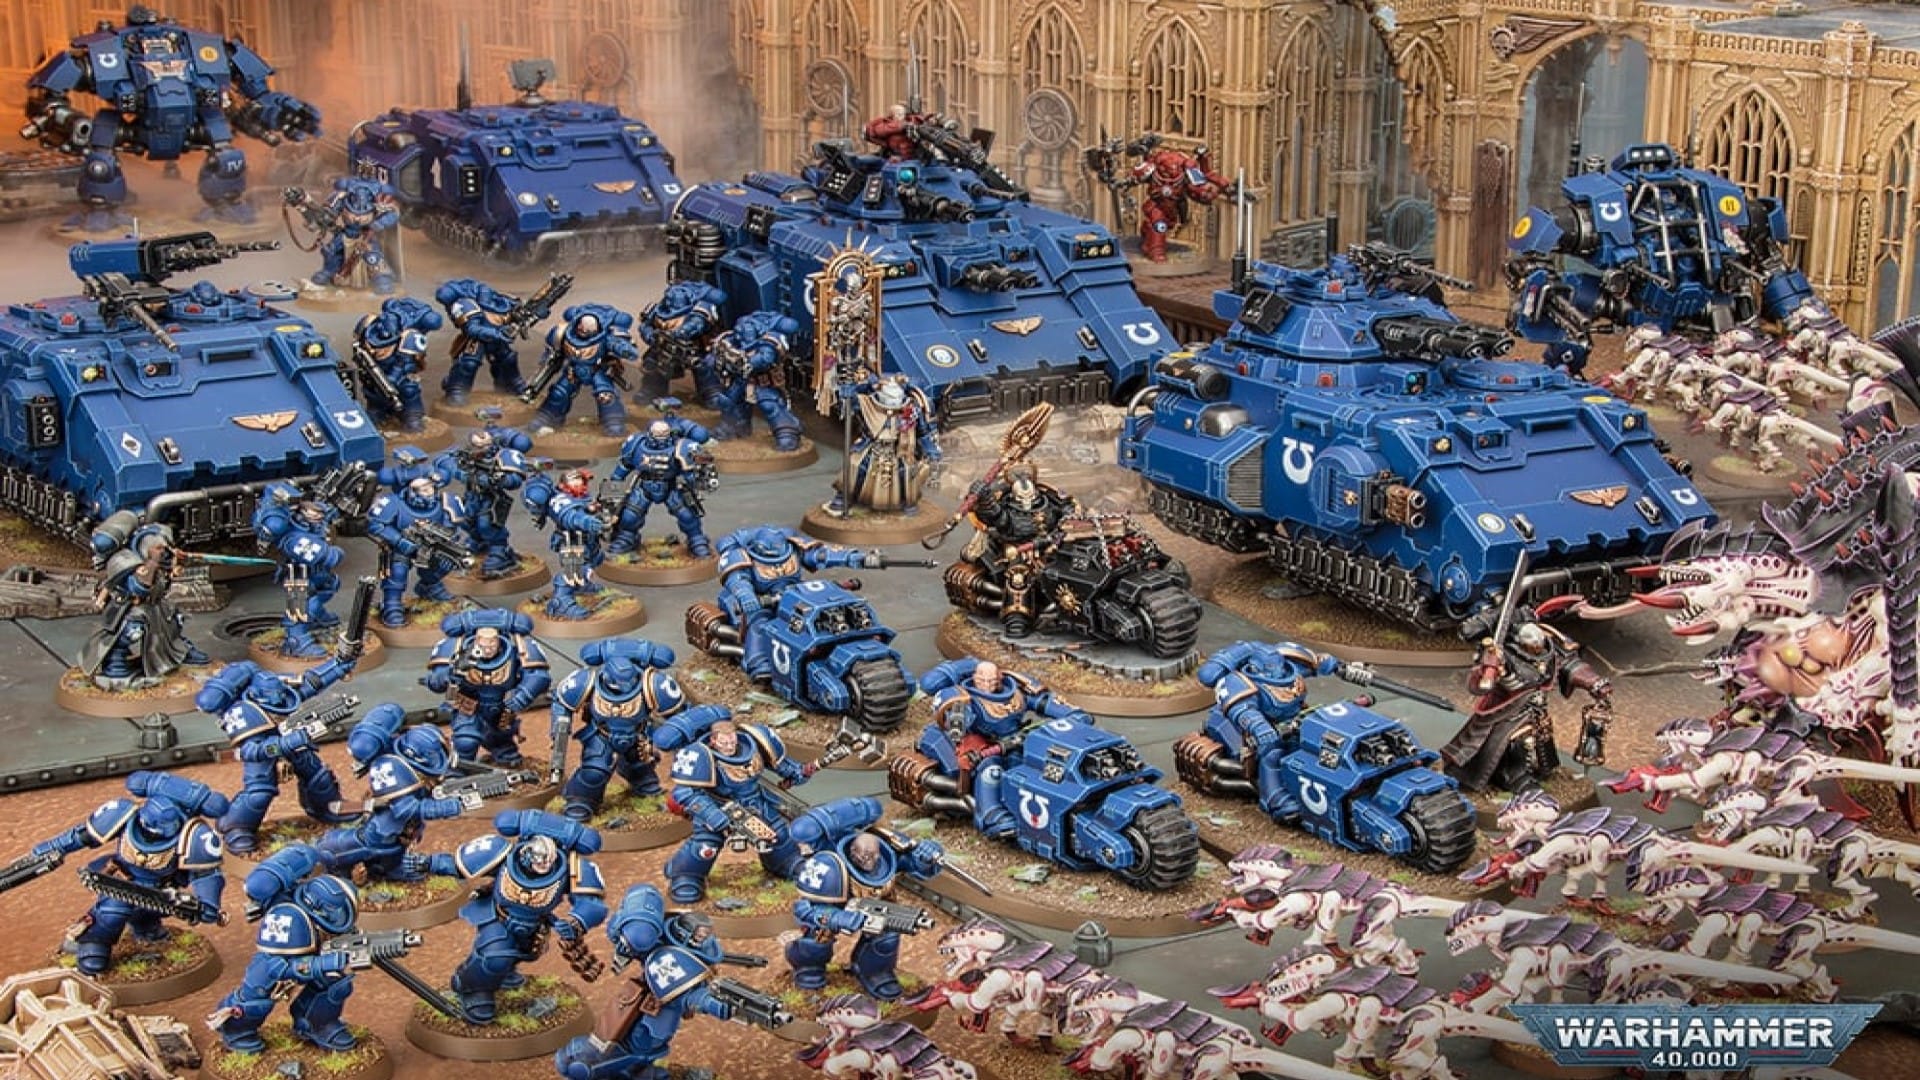 How big can a Warhammer army be?